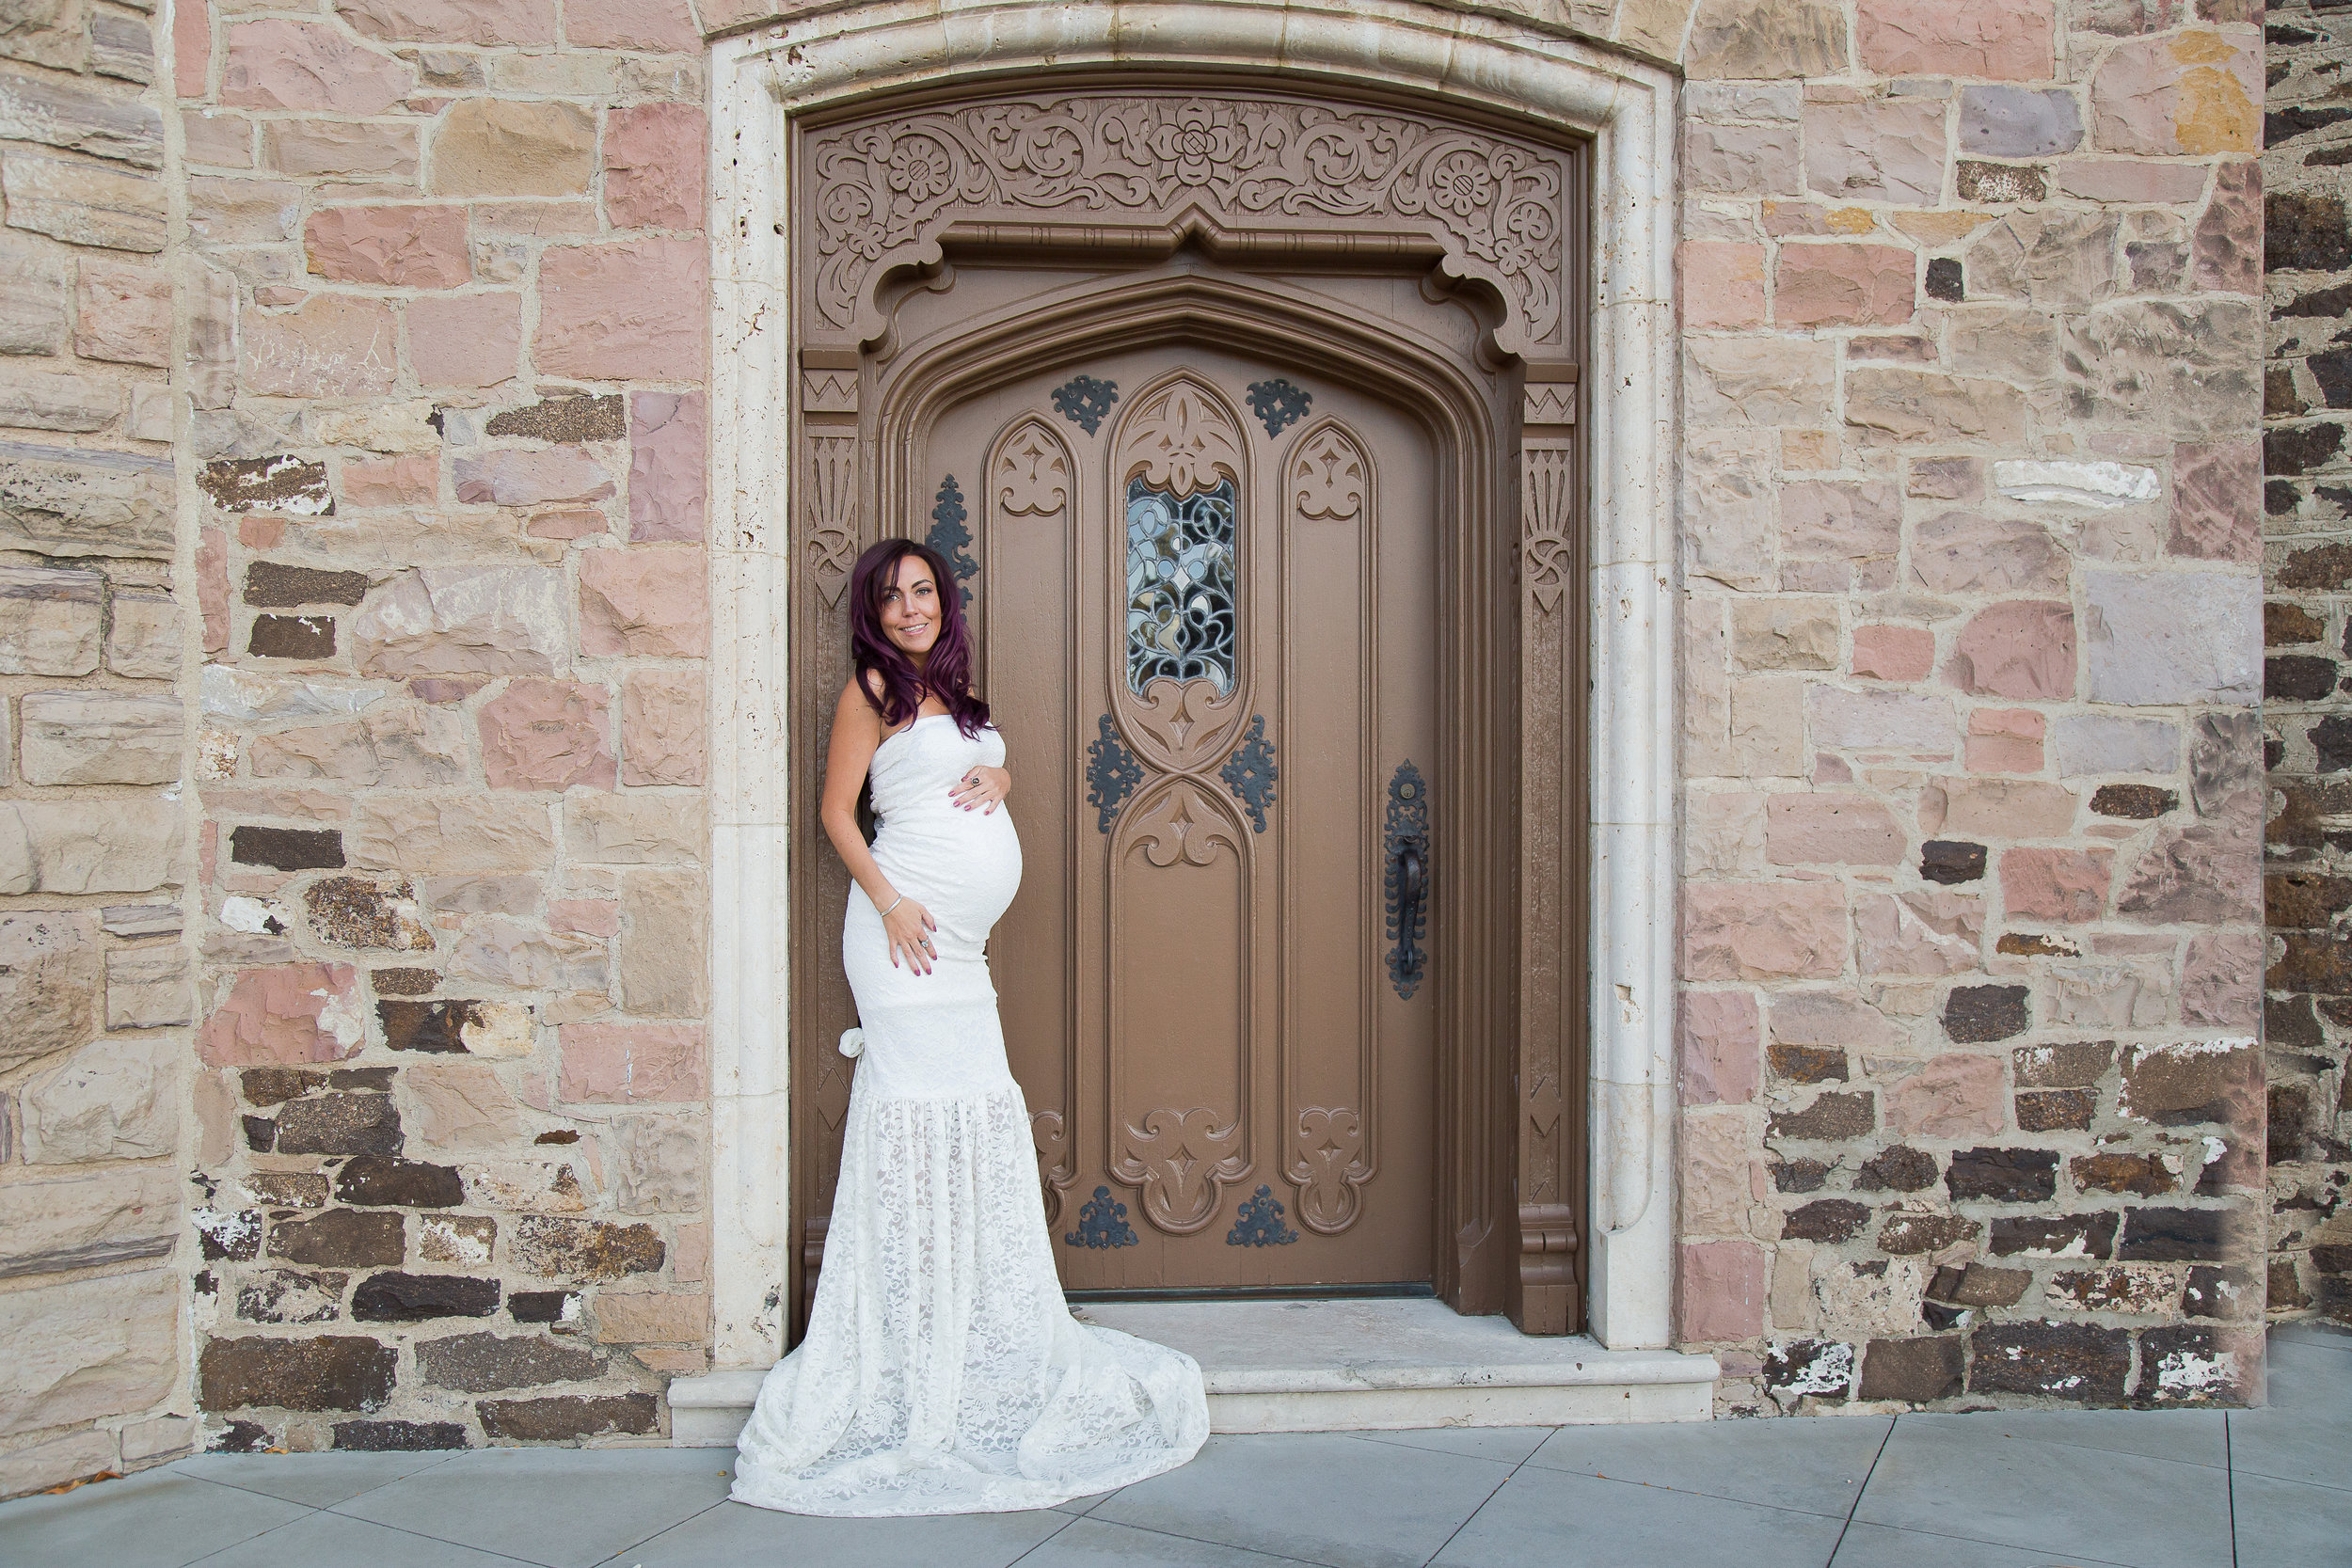 Maternity Photo at Mansion - White gown.jpg